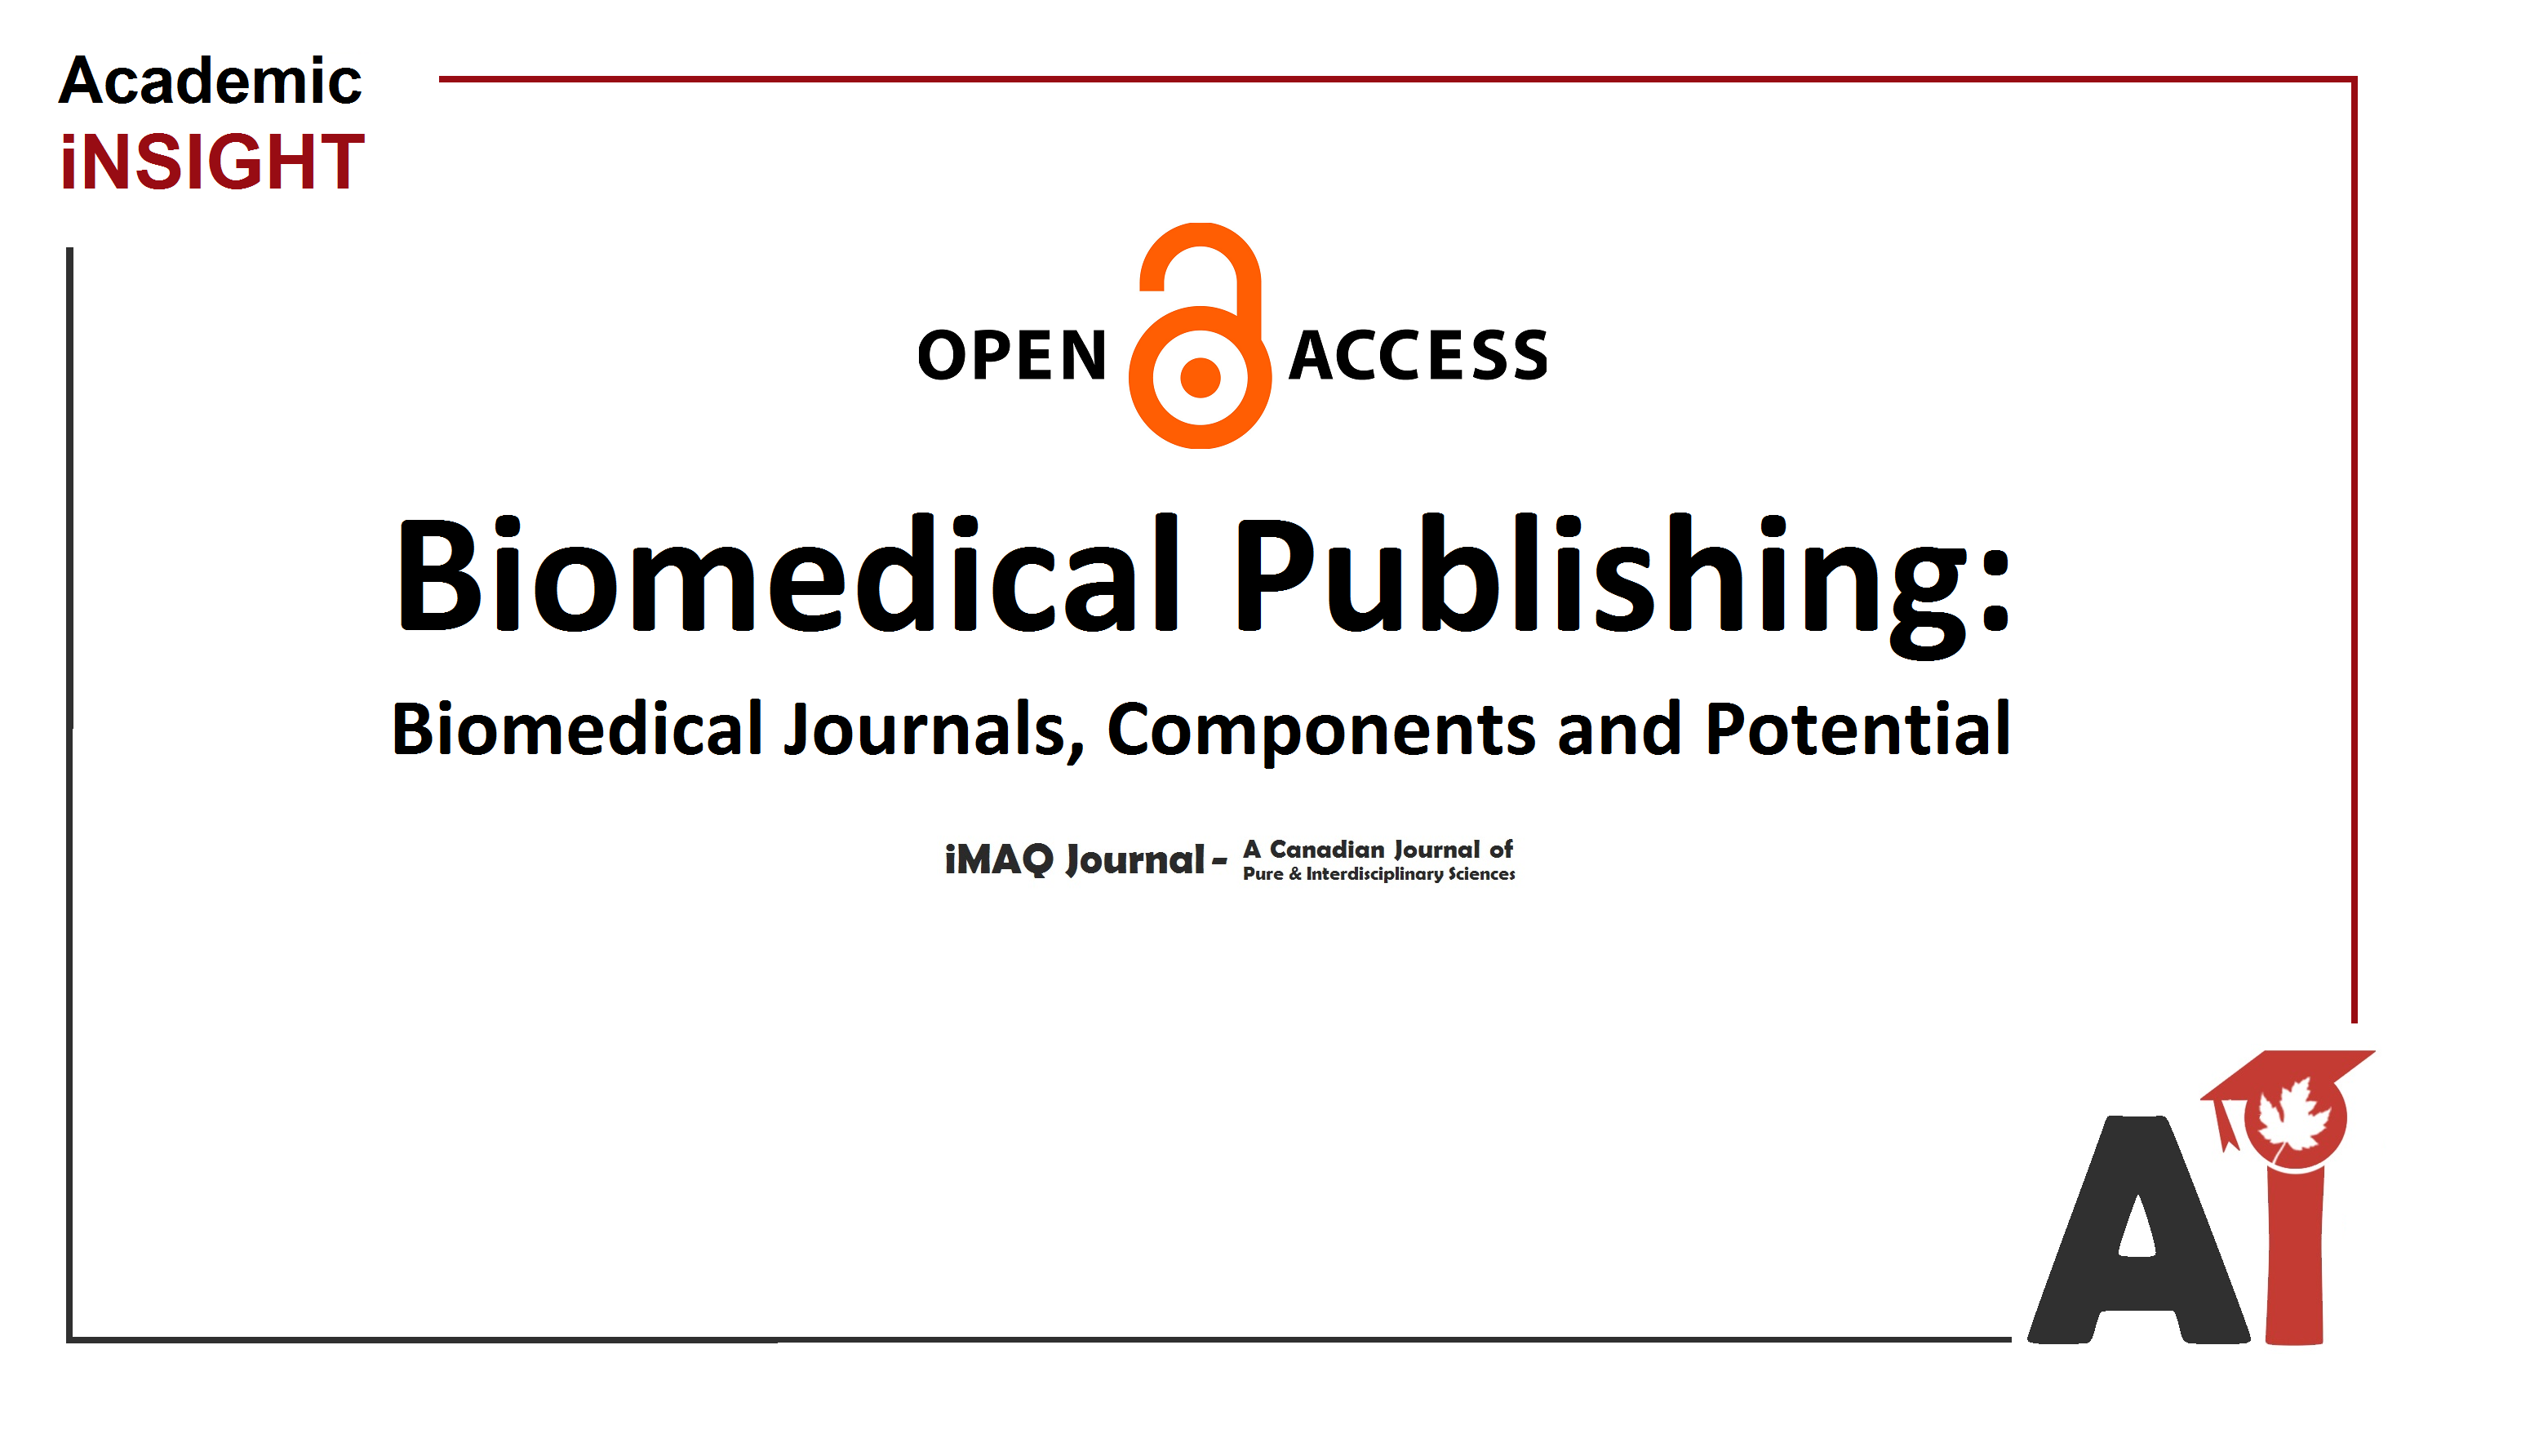 Biomedical Publishing: Biomedical Journals, Components and Potential